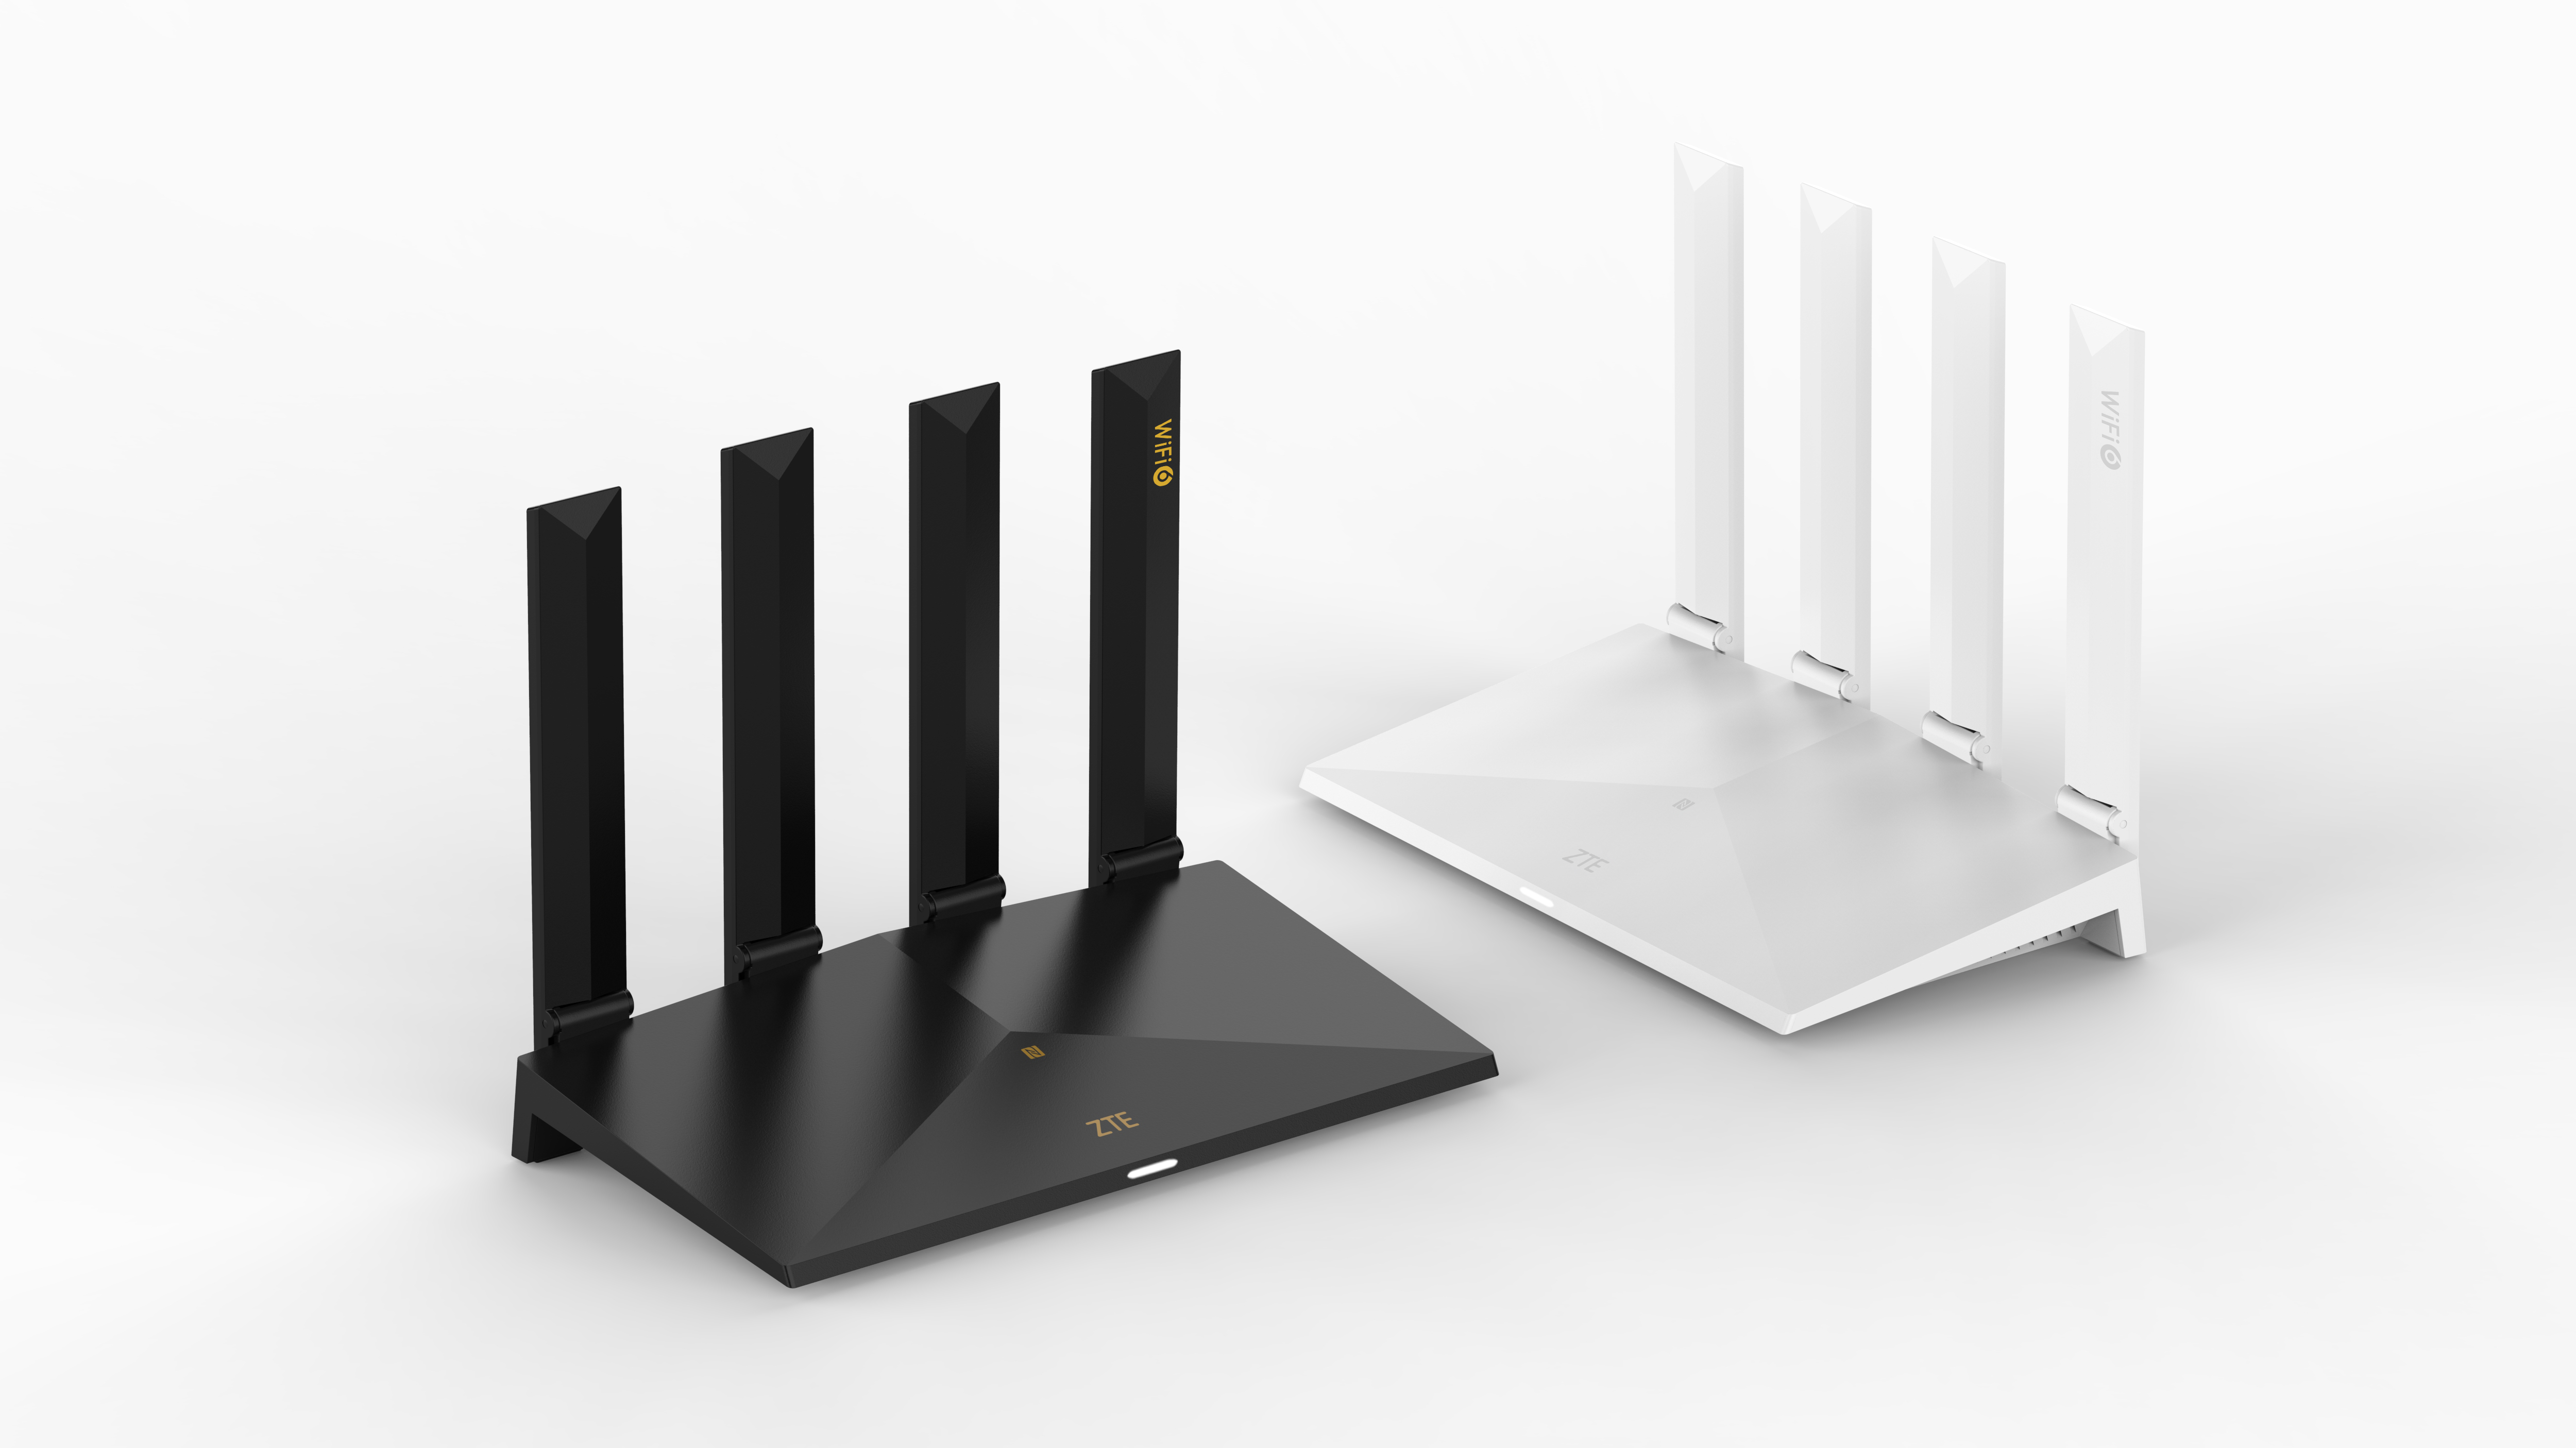 To expose bubble did it ZTE AX3000 Pro router launches with Wi-Fi 6 support, high-gain antennae and  NFC - NotebookCheck.net News